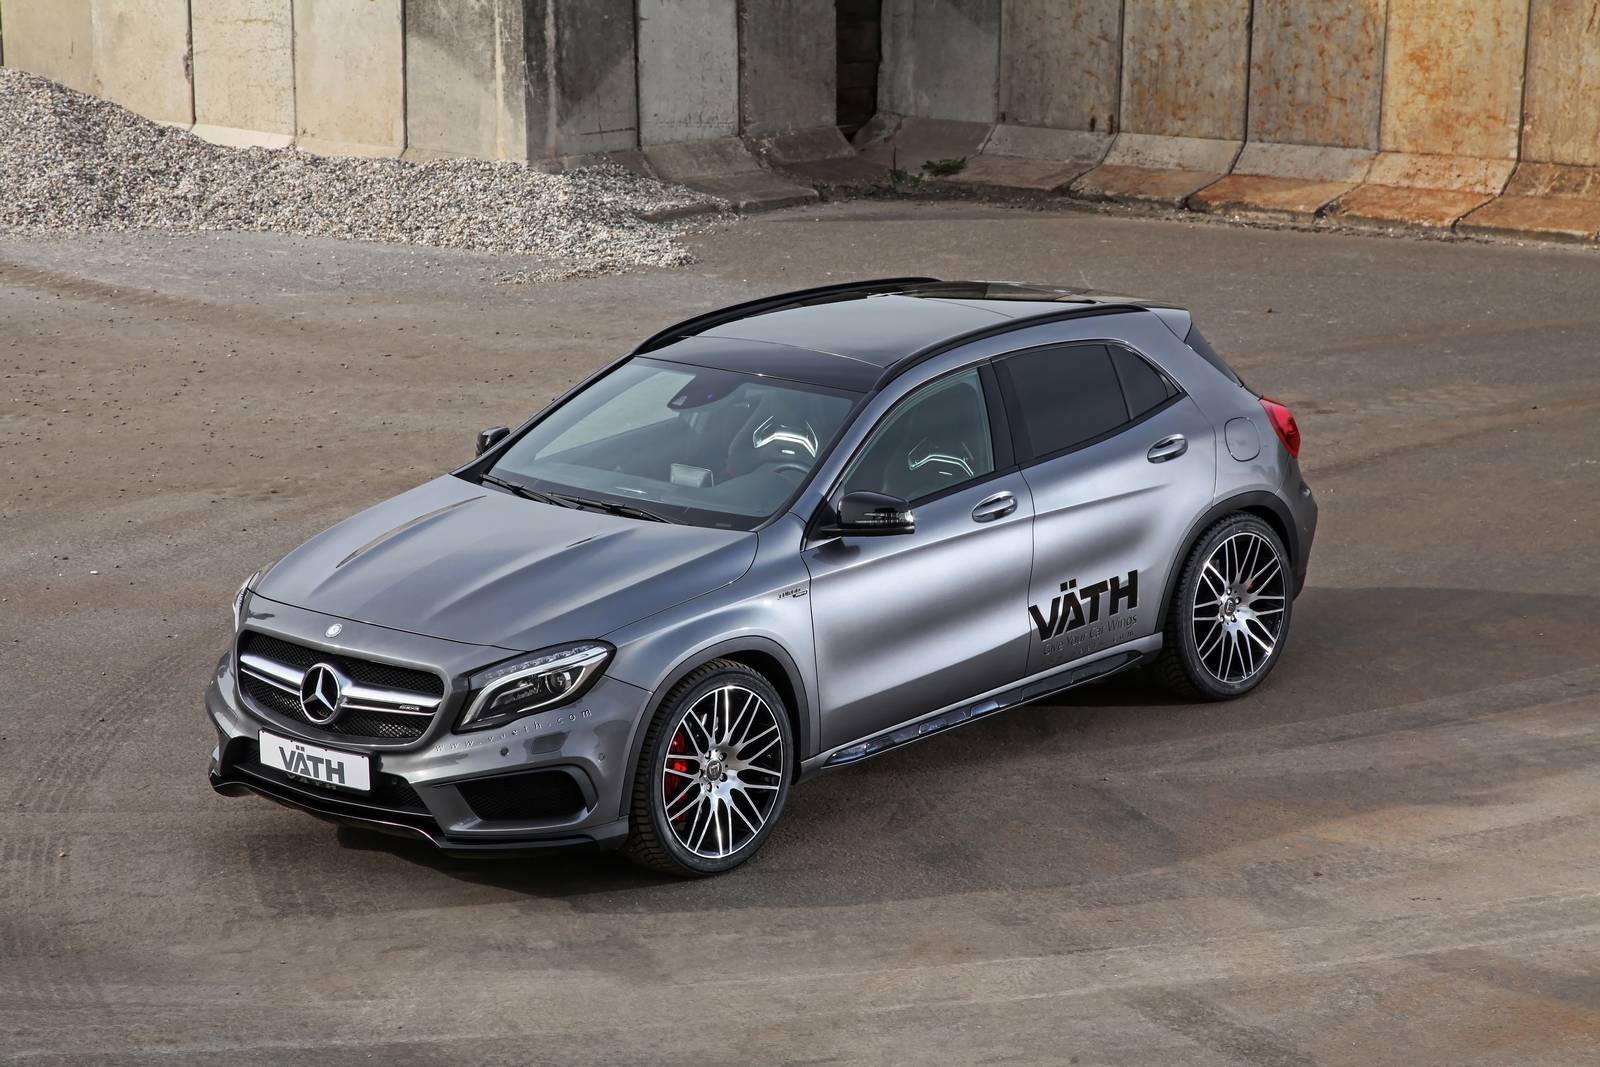 Mercedes-Benz GLA45 AMG Crossover Tuned By Vath 10